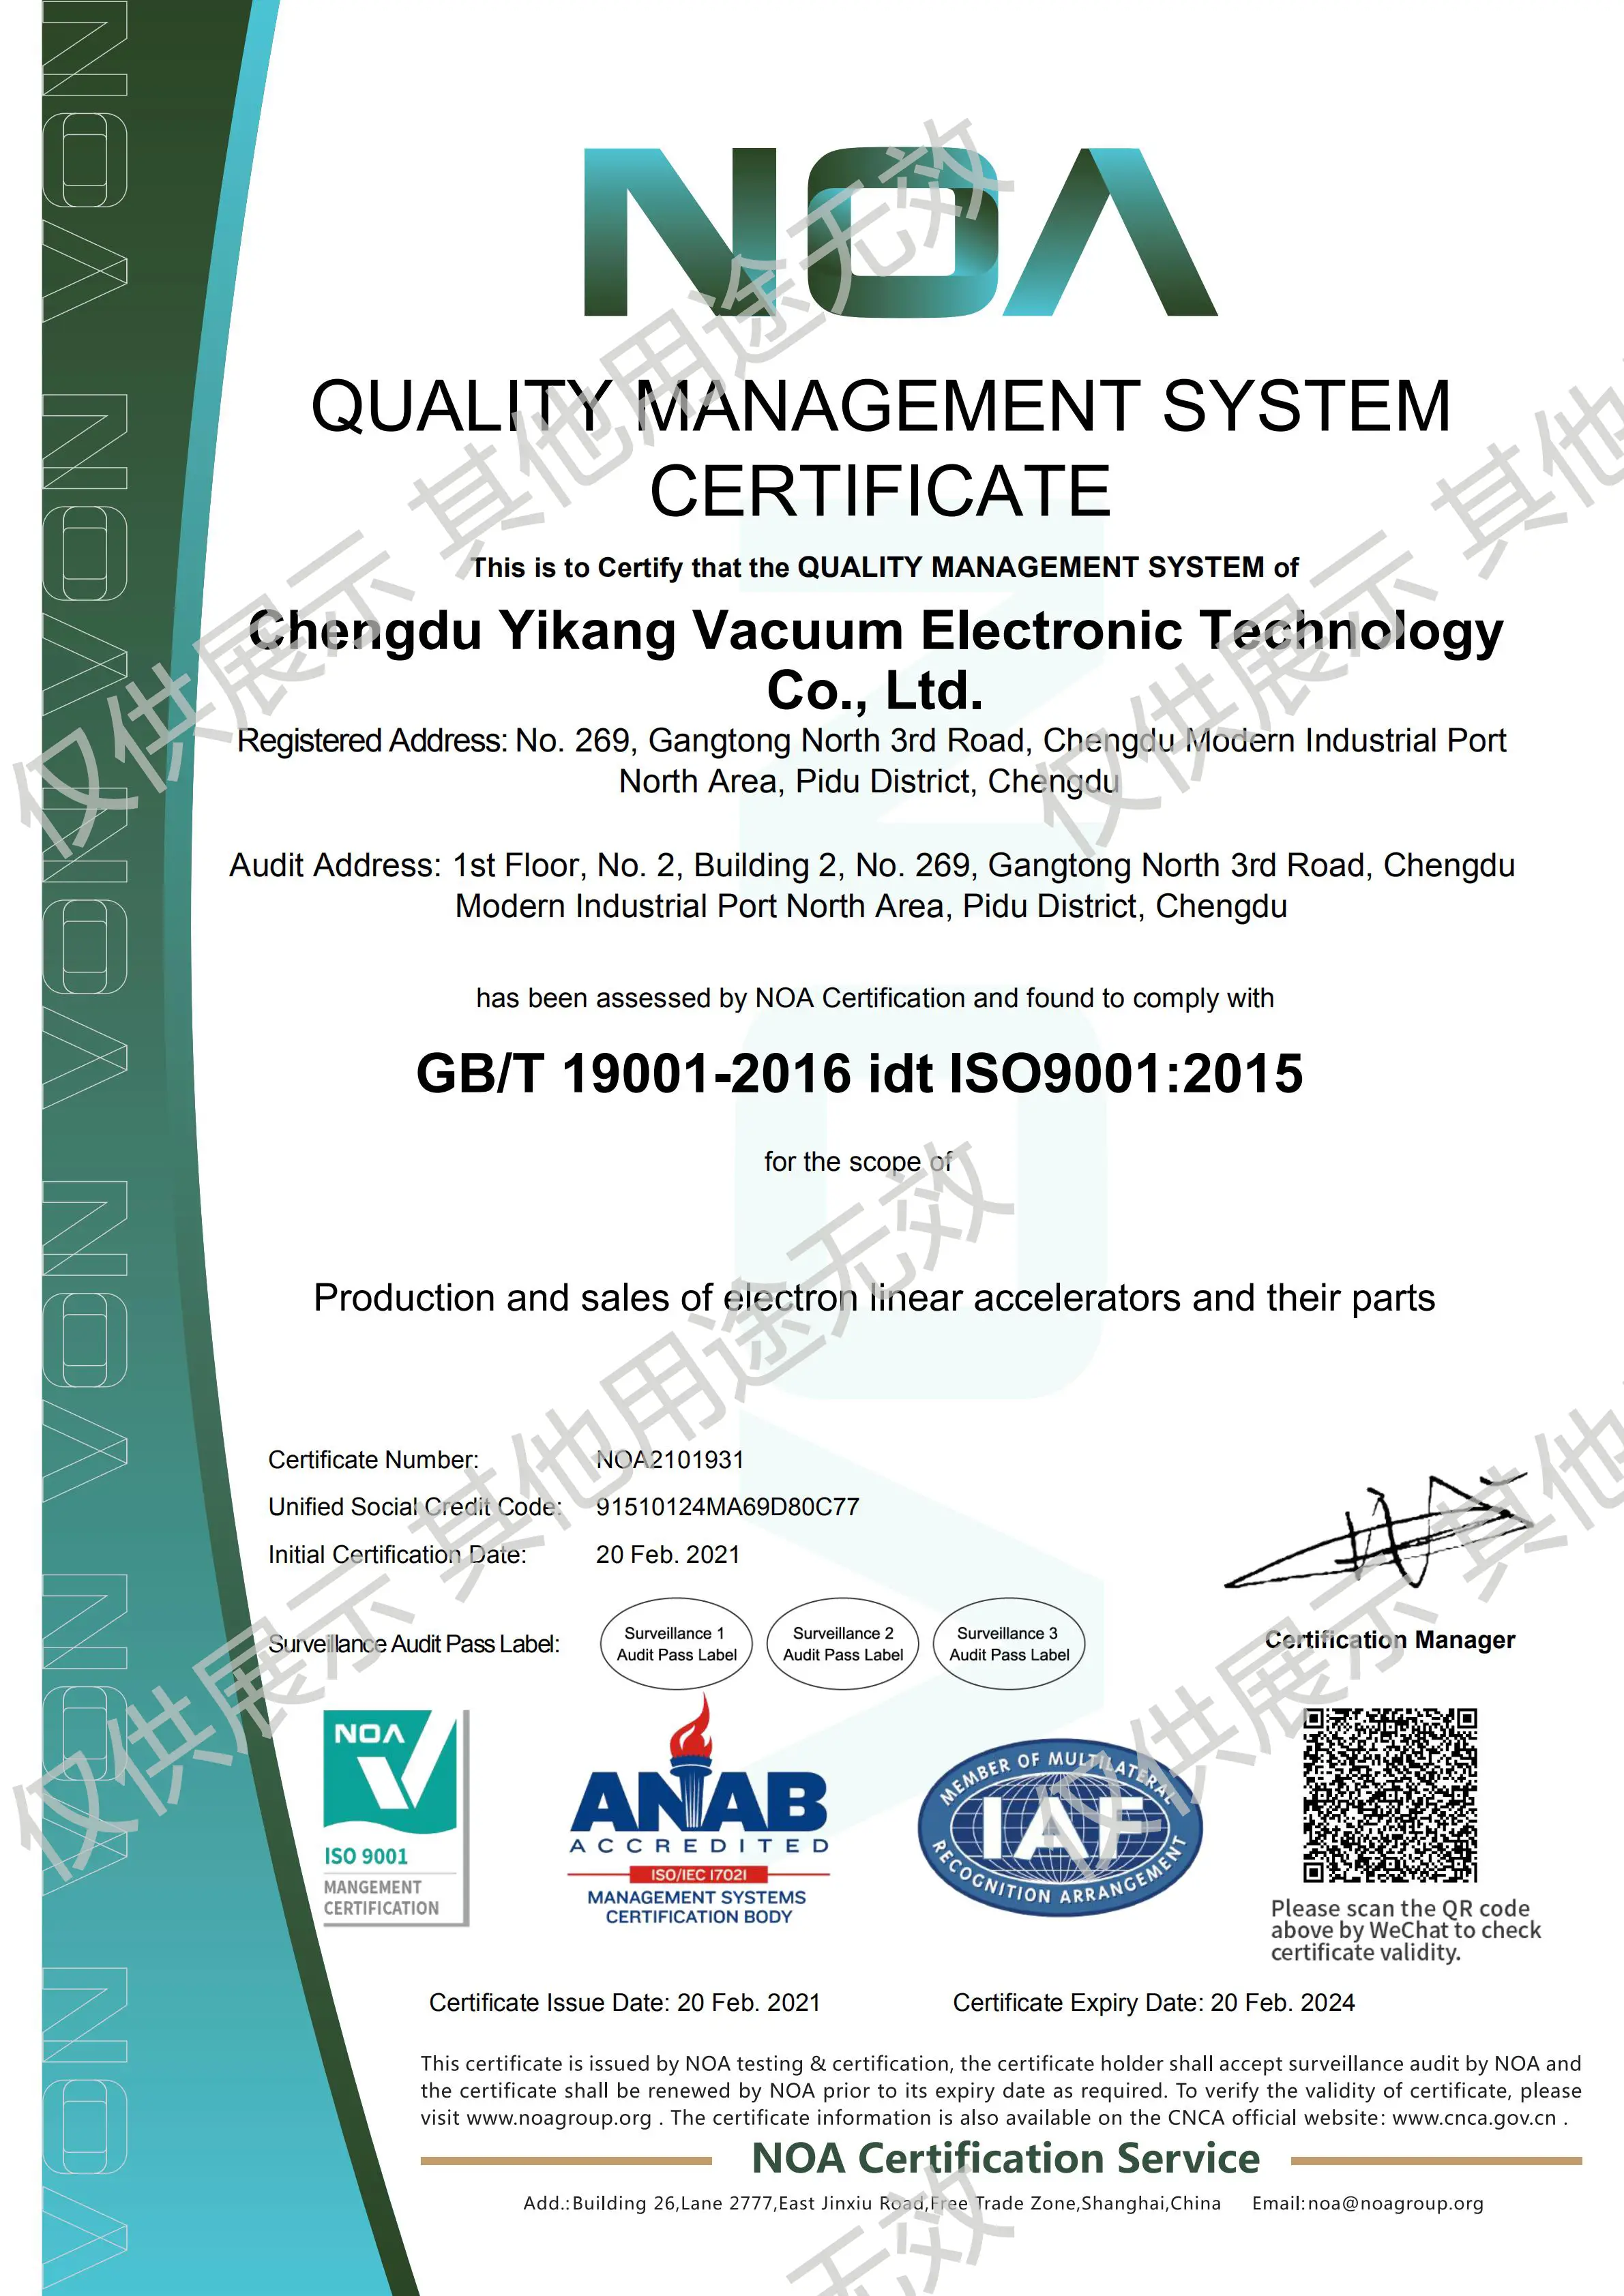 Good news : warm congratulations to our company for successfully passing ISO9001 quality management system certification